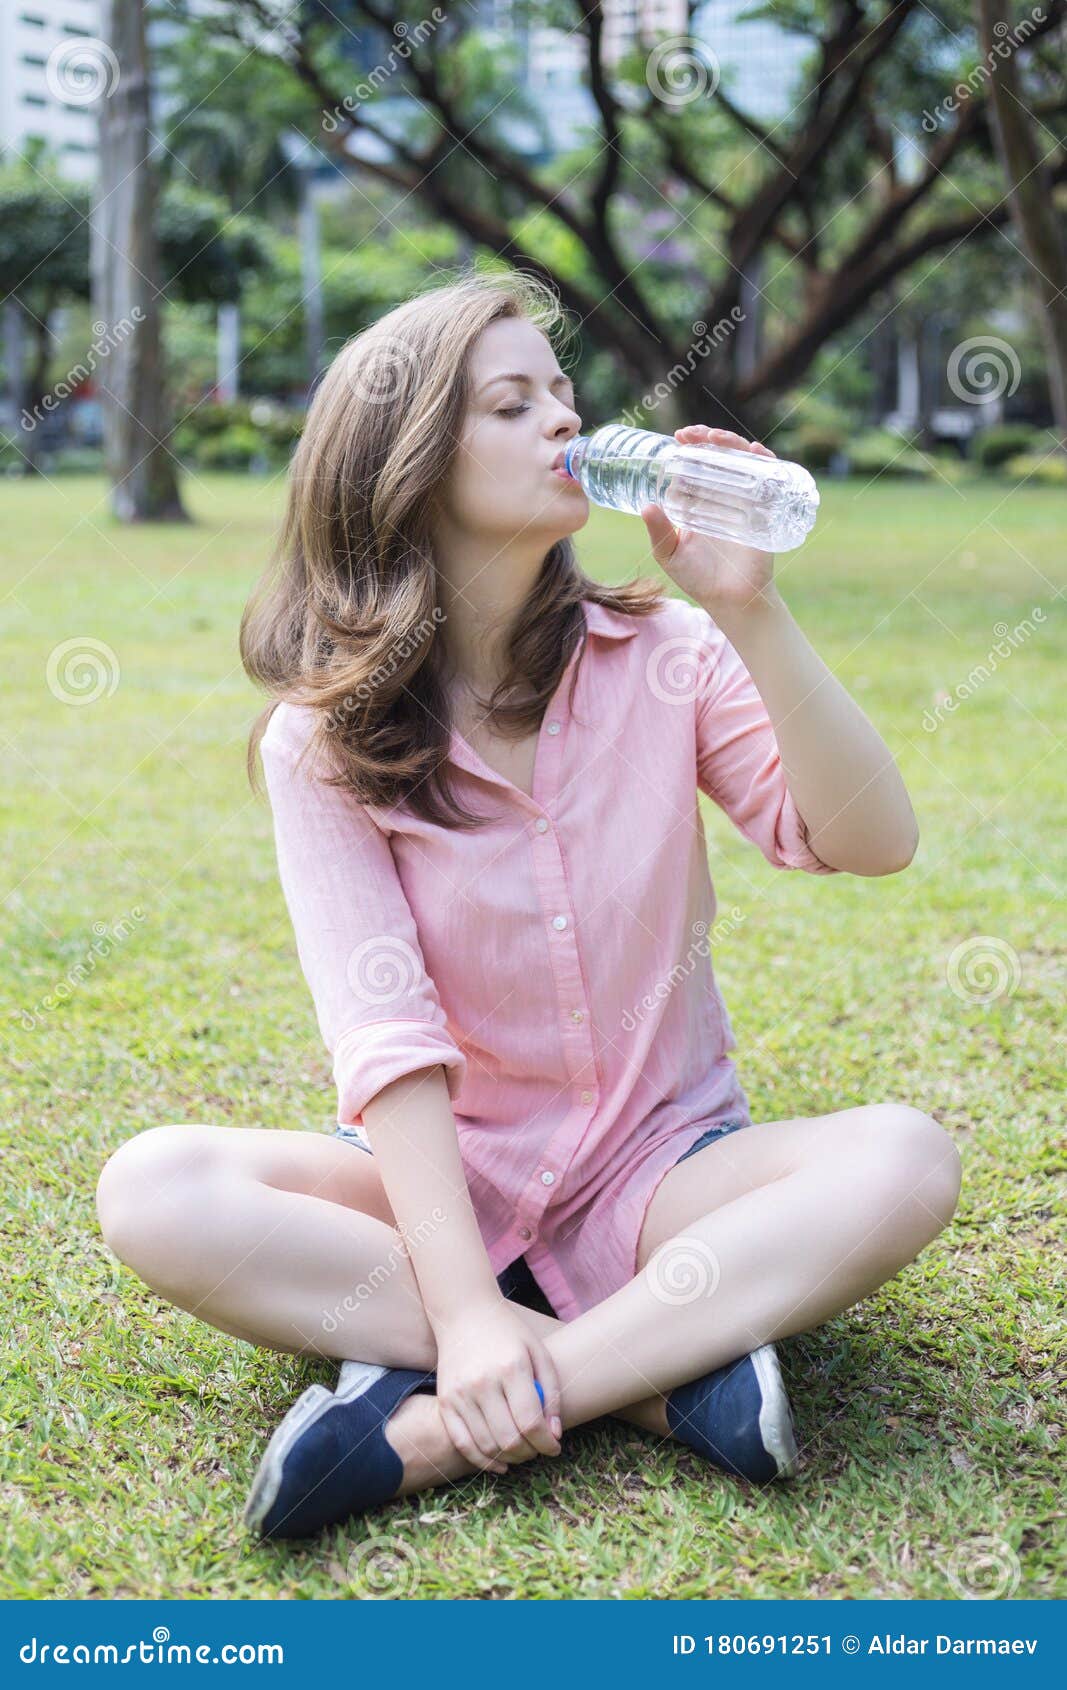 Young Girl Drinking From Water Bottle Stock Photo 